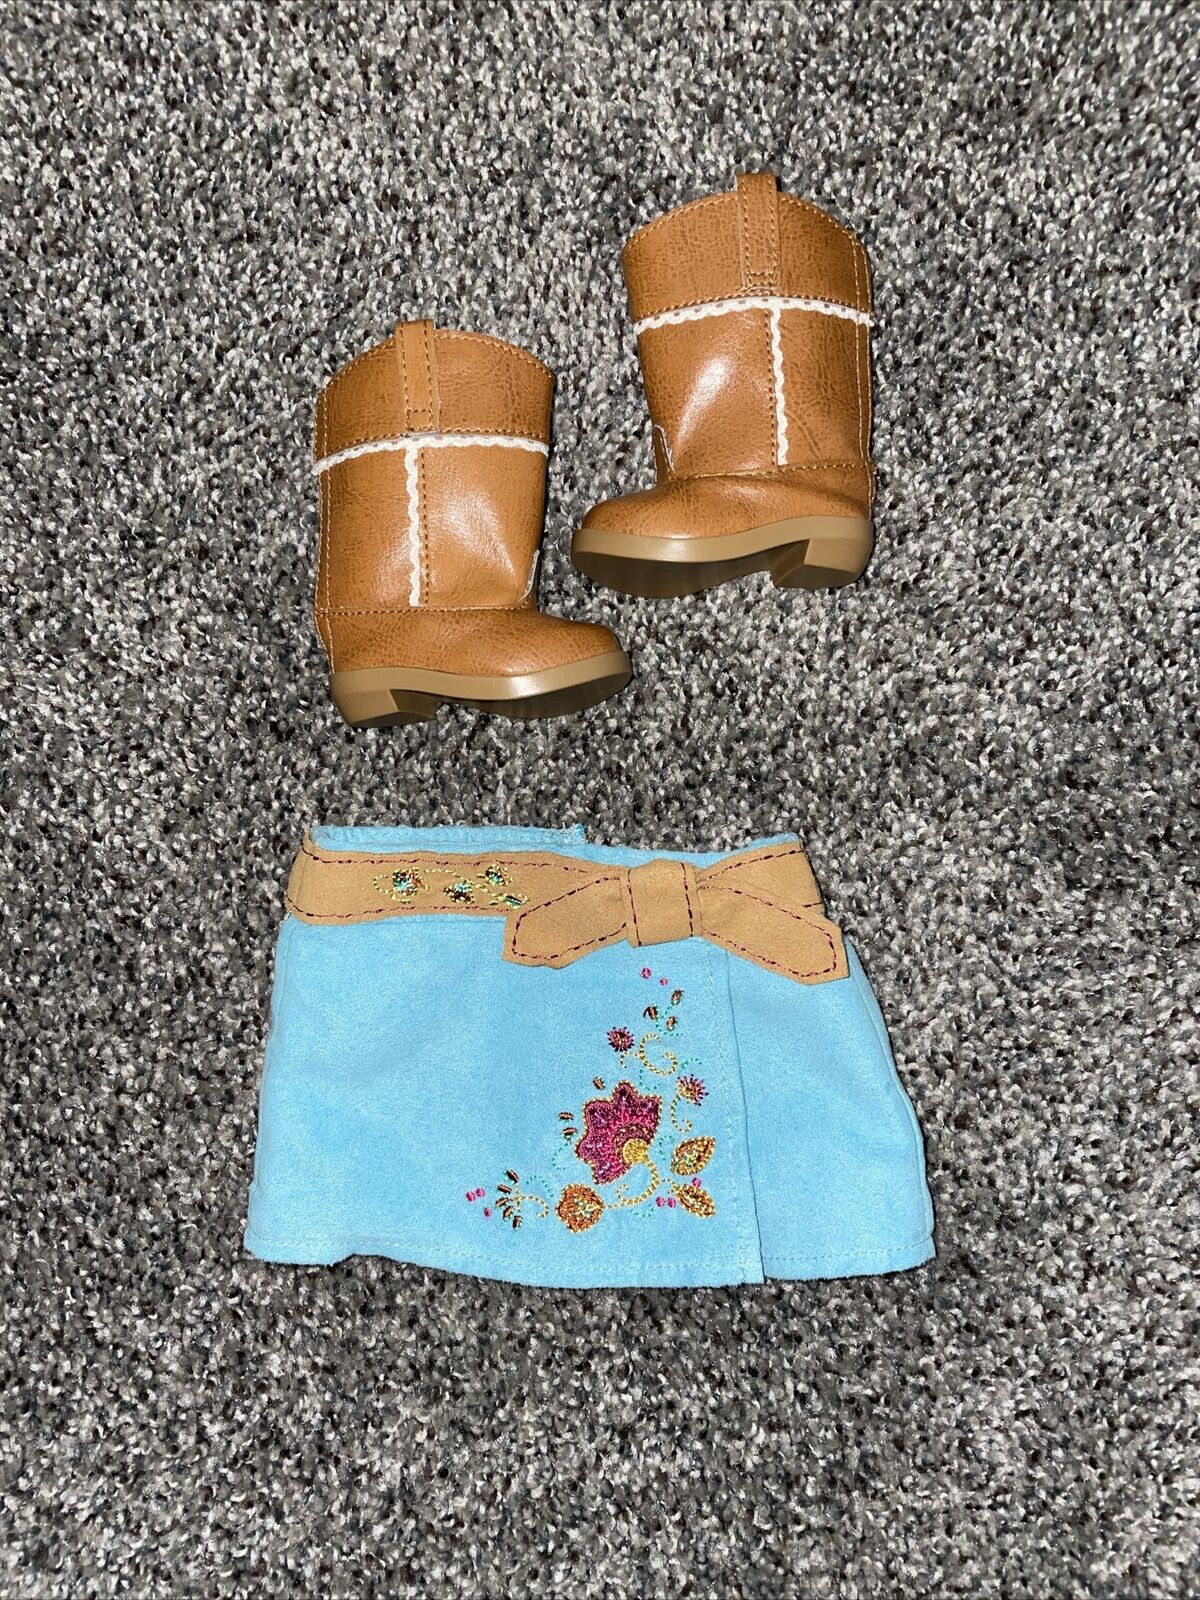 American Girl Nicki 2007 Doll Of The Year Skirt & Boots ONLY meet outfit Retired